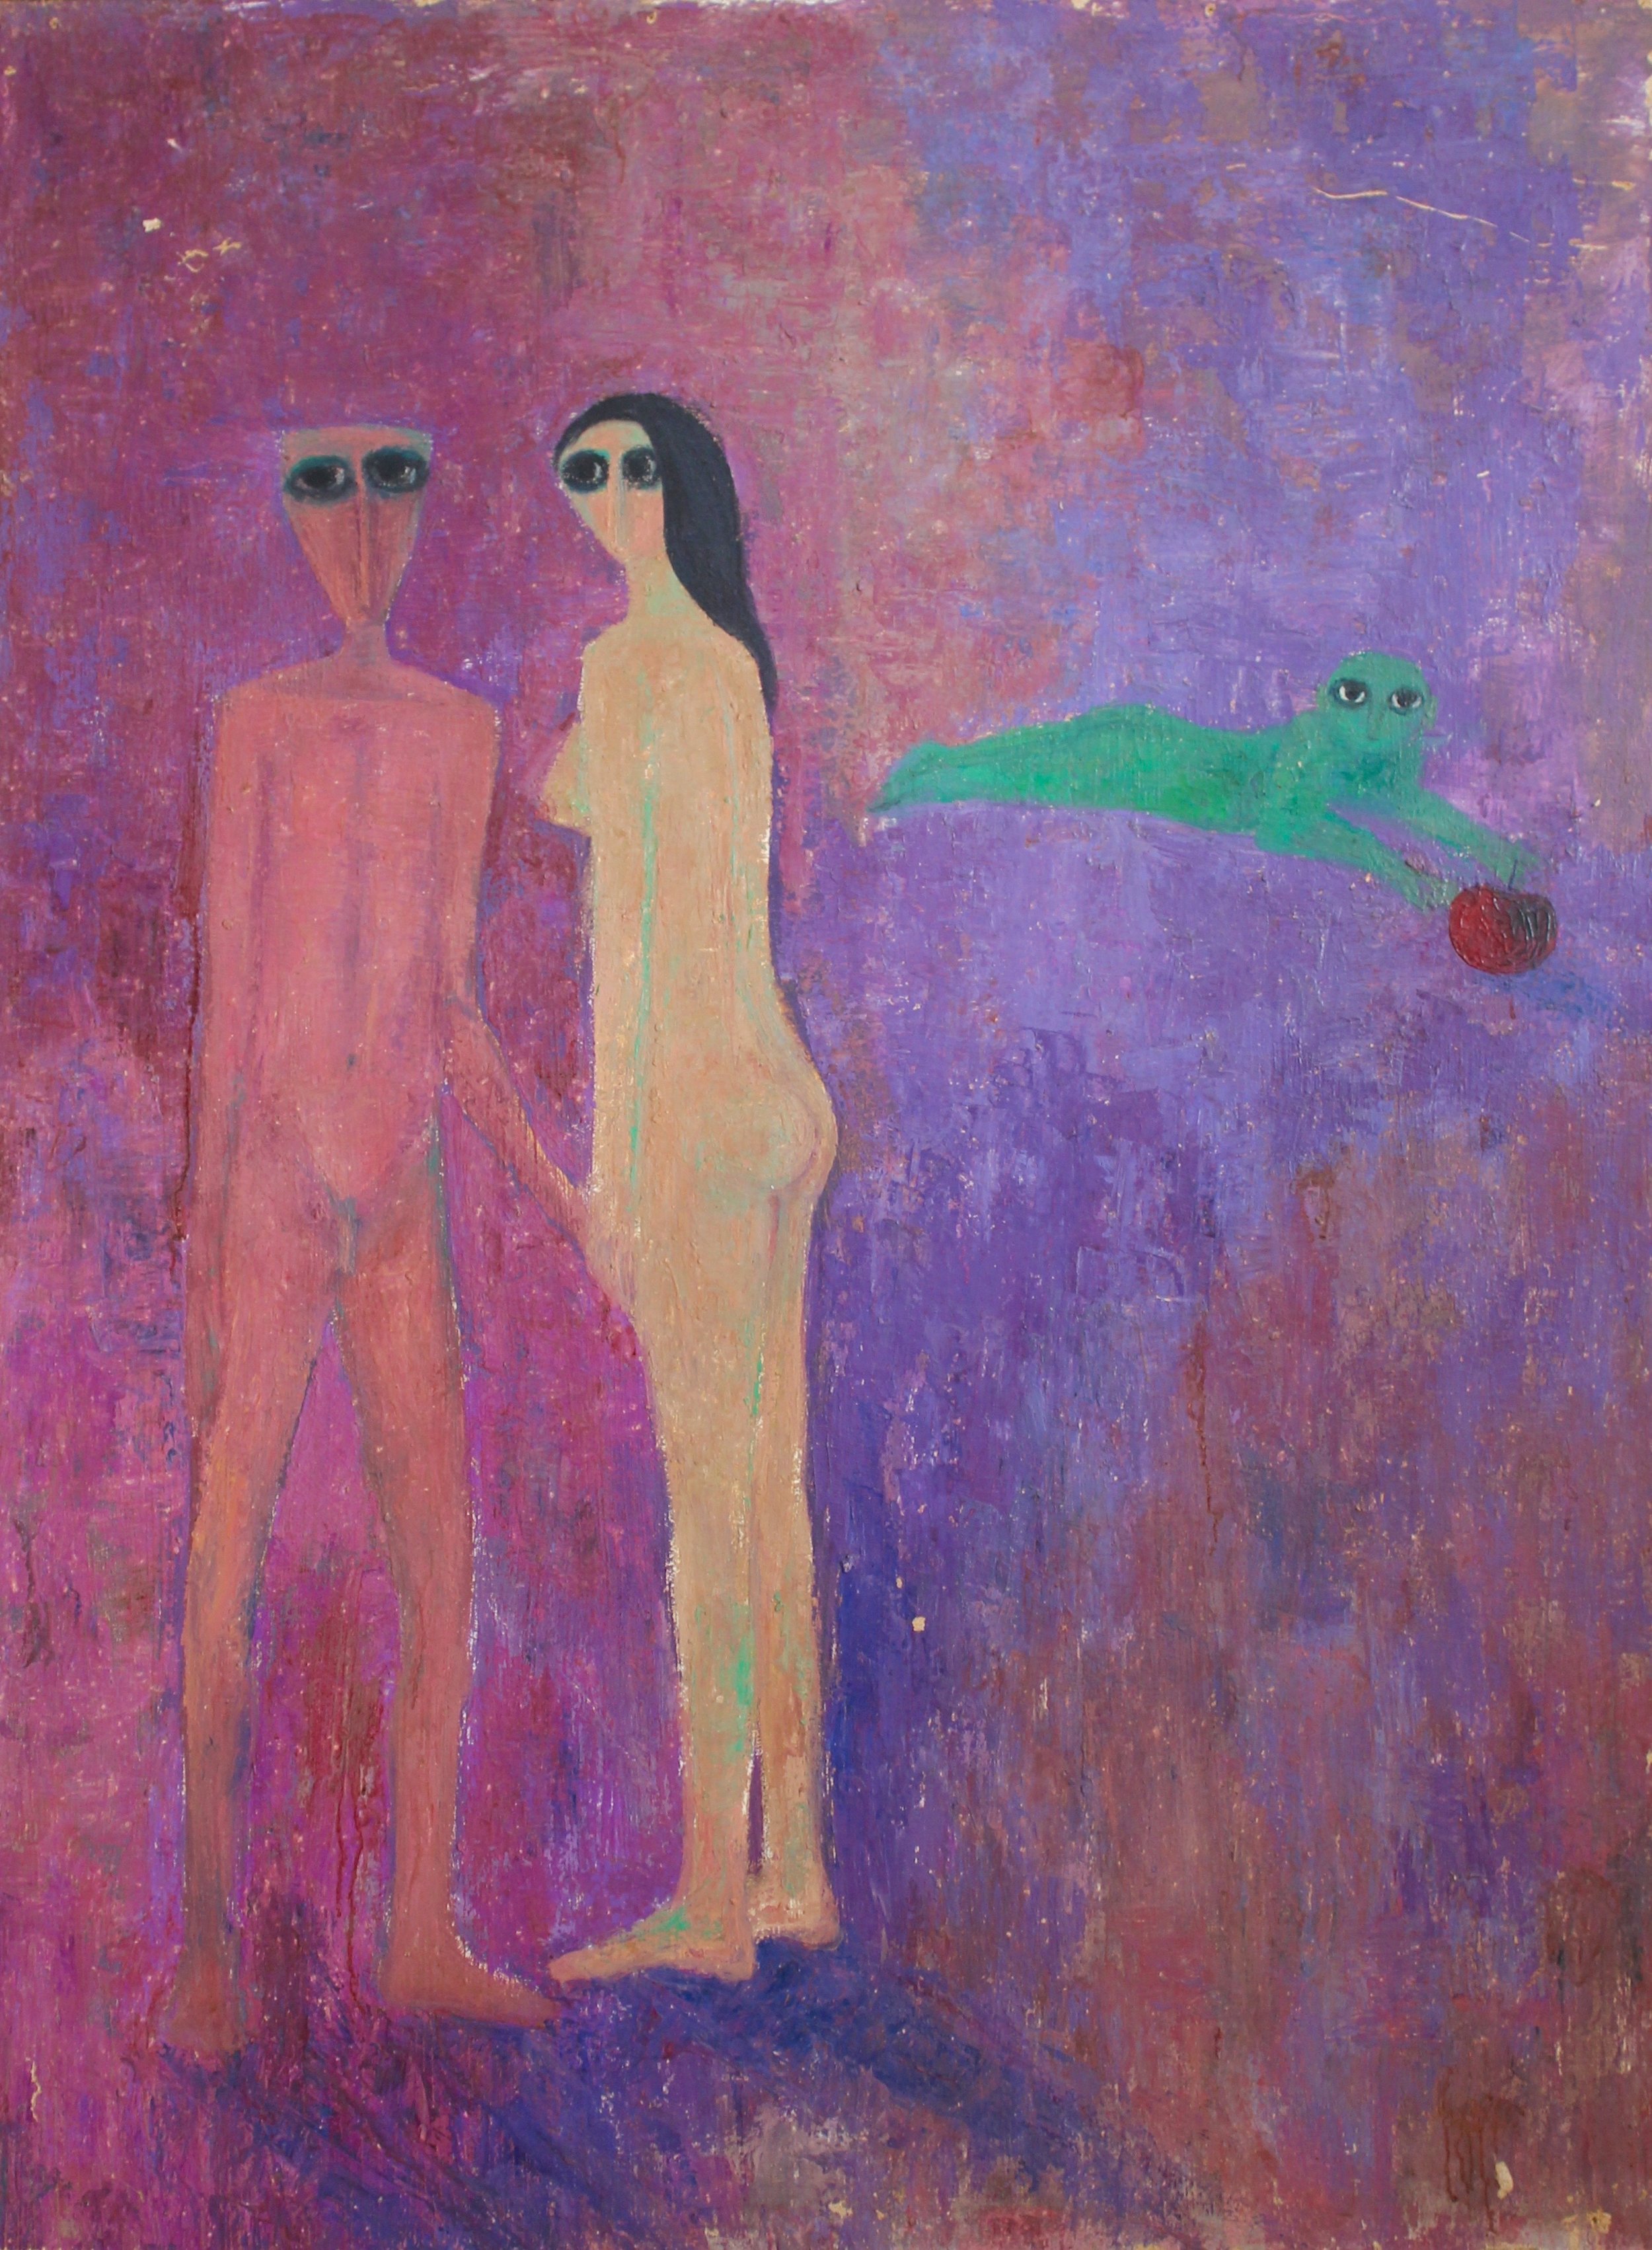  Adam and Eve, 1959, Oil on wood, 119 x 89 cm  